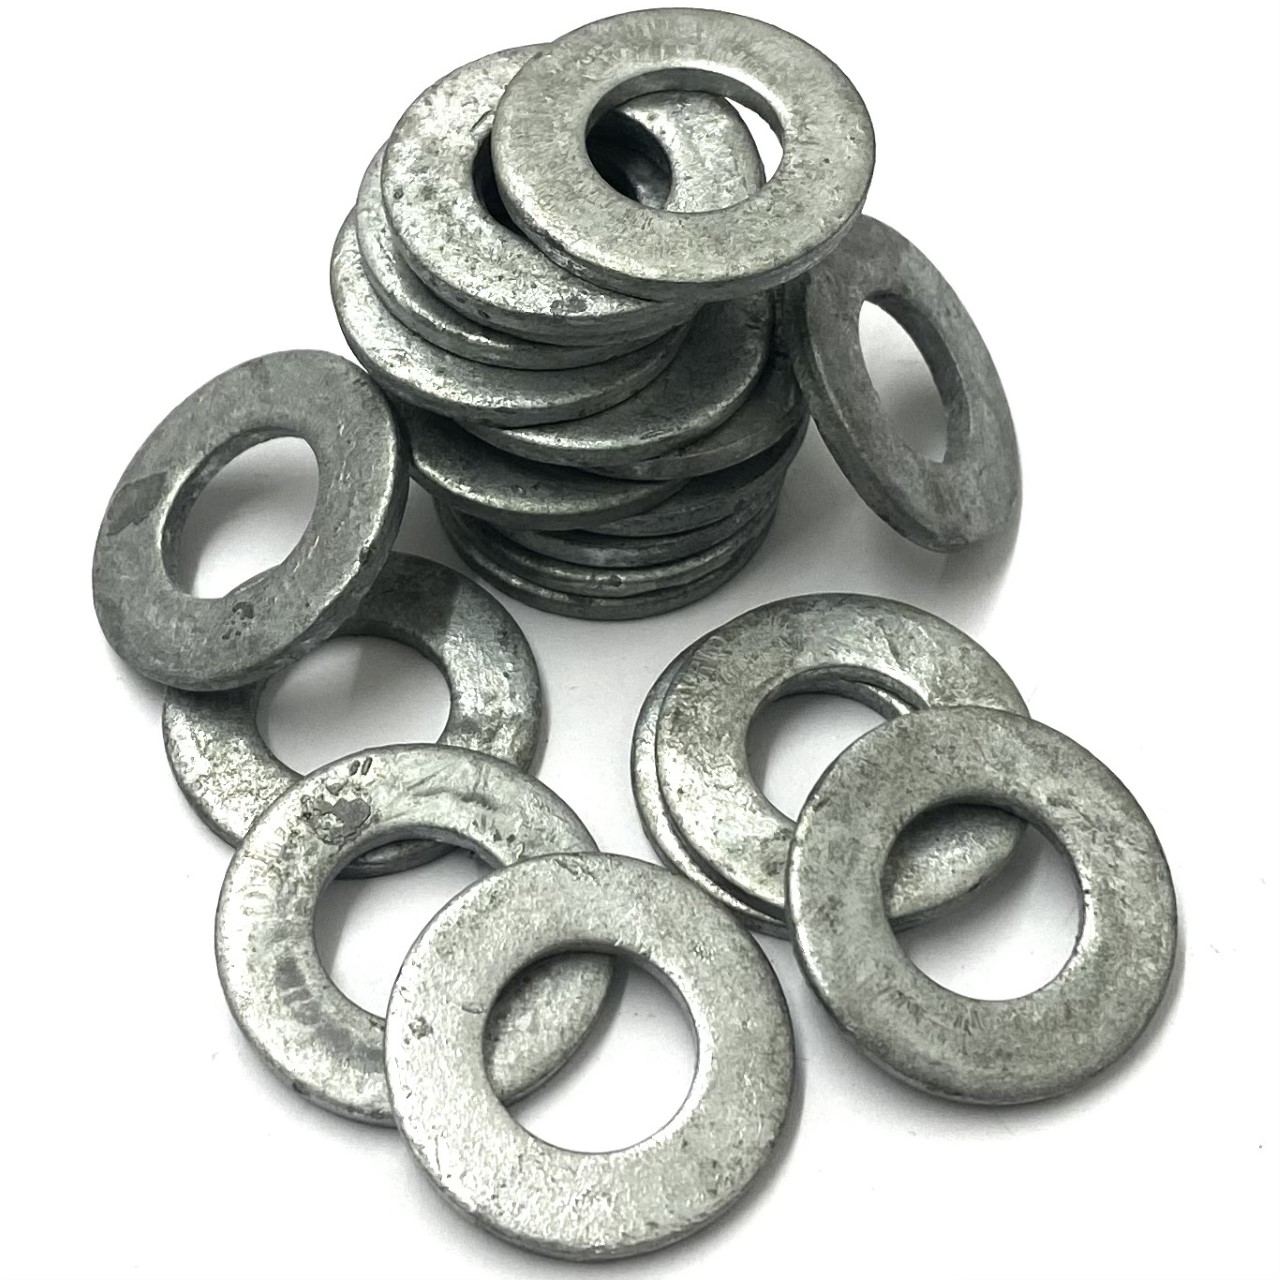 M10 Form A Flat Washers (DIN 125) - Stainless Steel (A4)